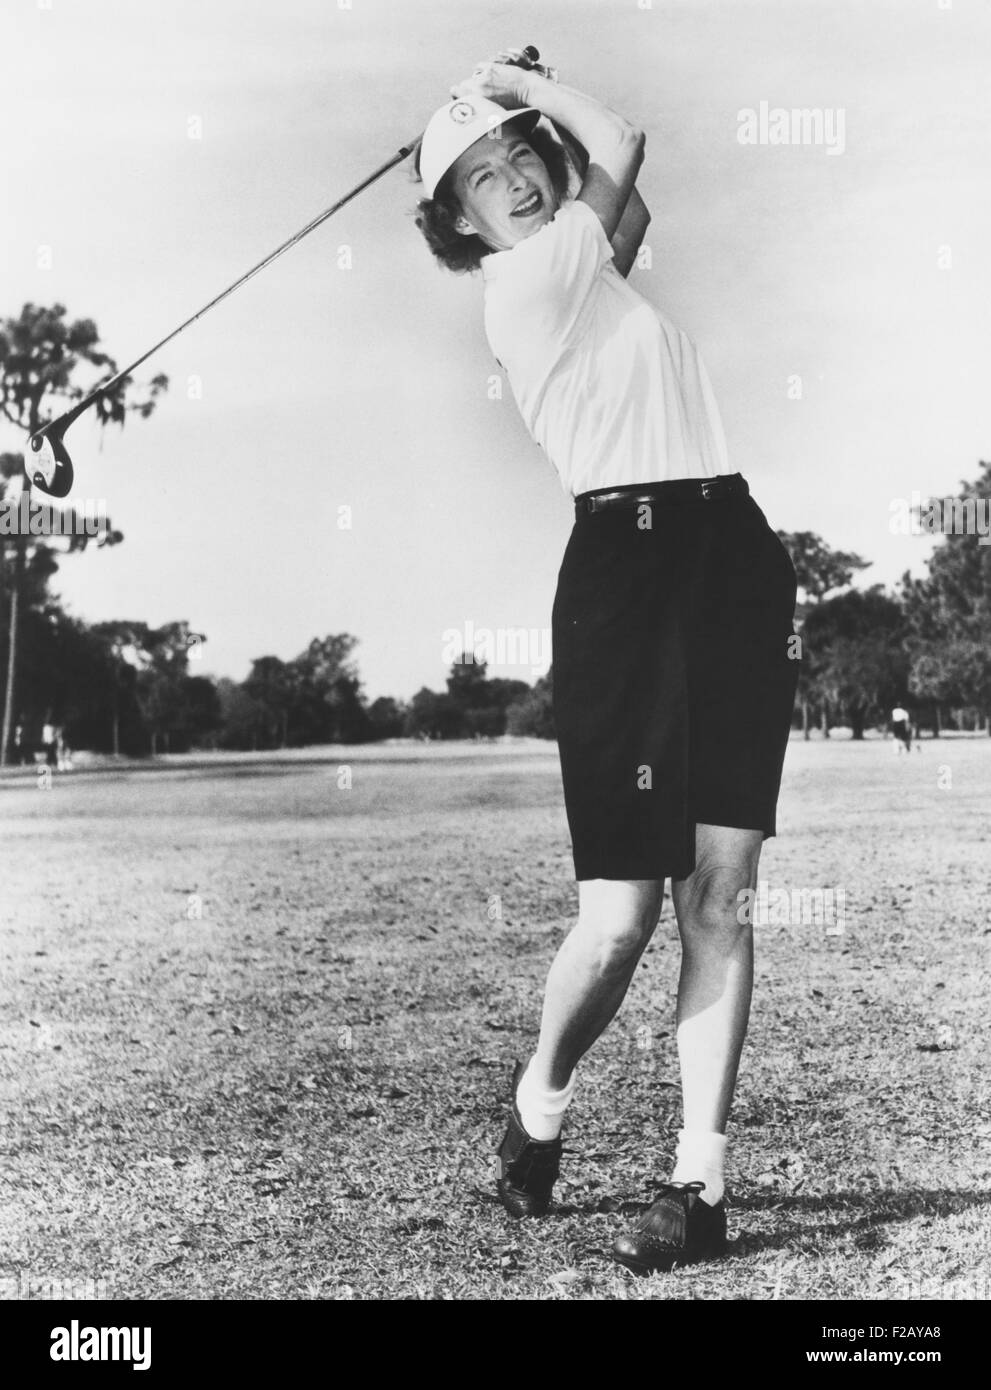 Gloria Fecht, former Ice Follies skater became a noted golfer in the 1950s and 1960s. She was a member of the LCGA, Ladies Professional Golf Association. (CSU 2015 9 819) Stock Photo